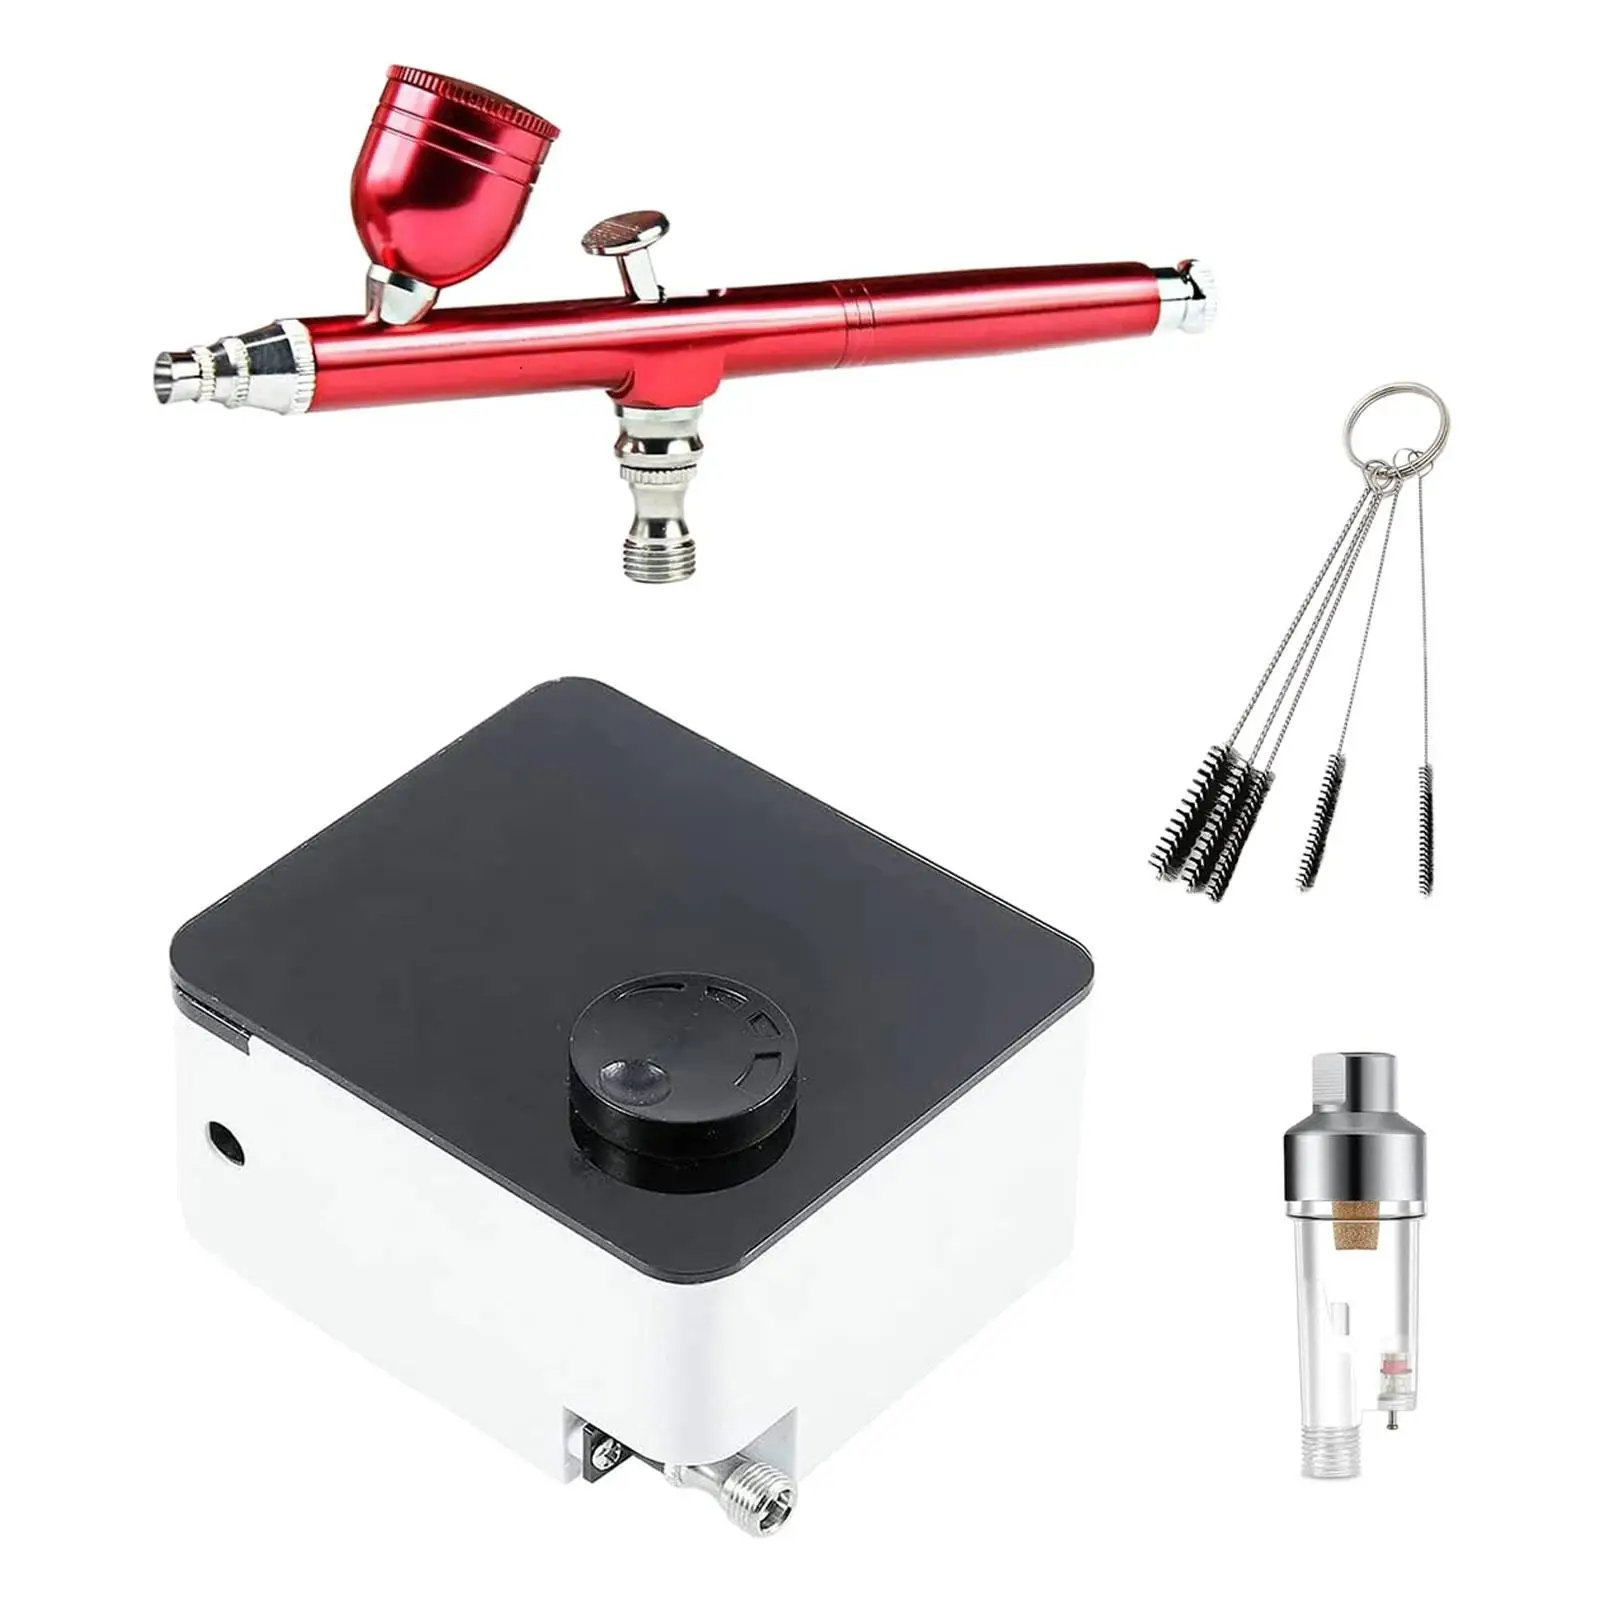 Airbrush Set Centerpiece Multipurpose Portable Durable Attachments Air Compressor Air Pump for Model Making Body Painting